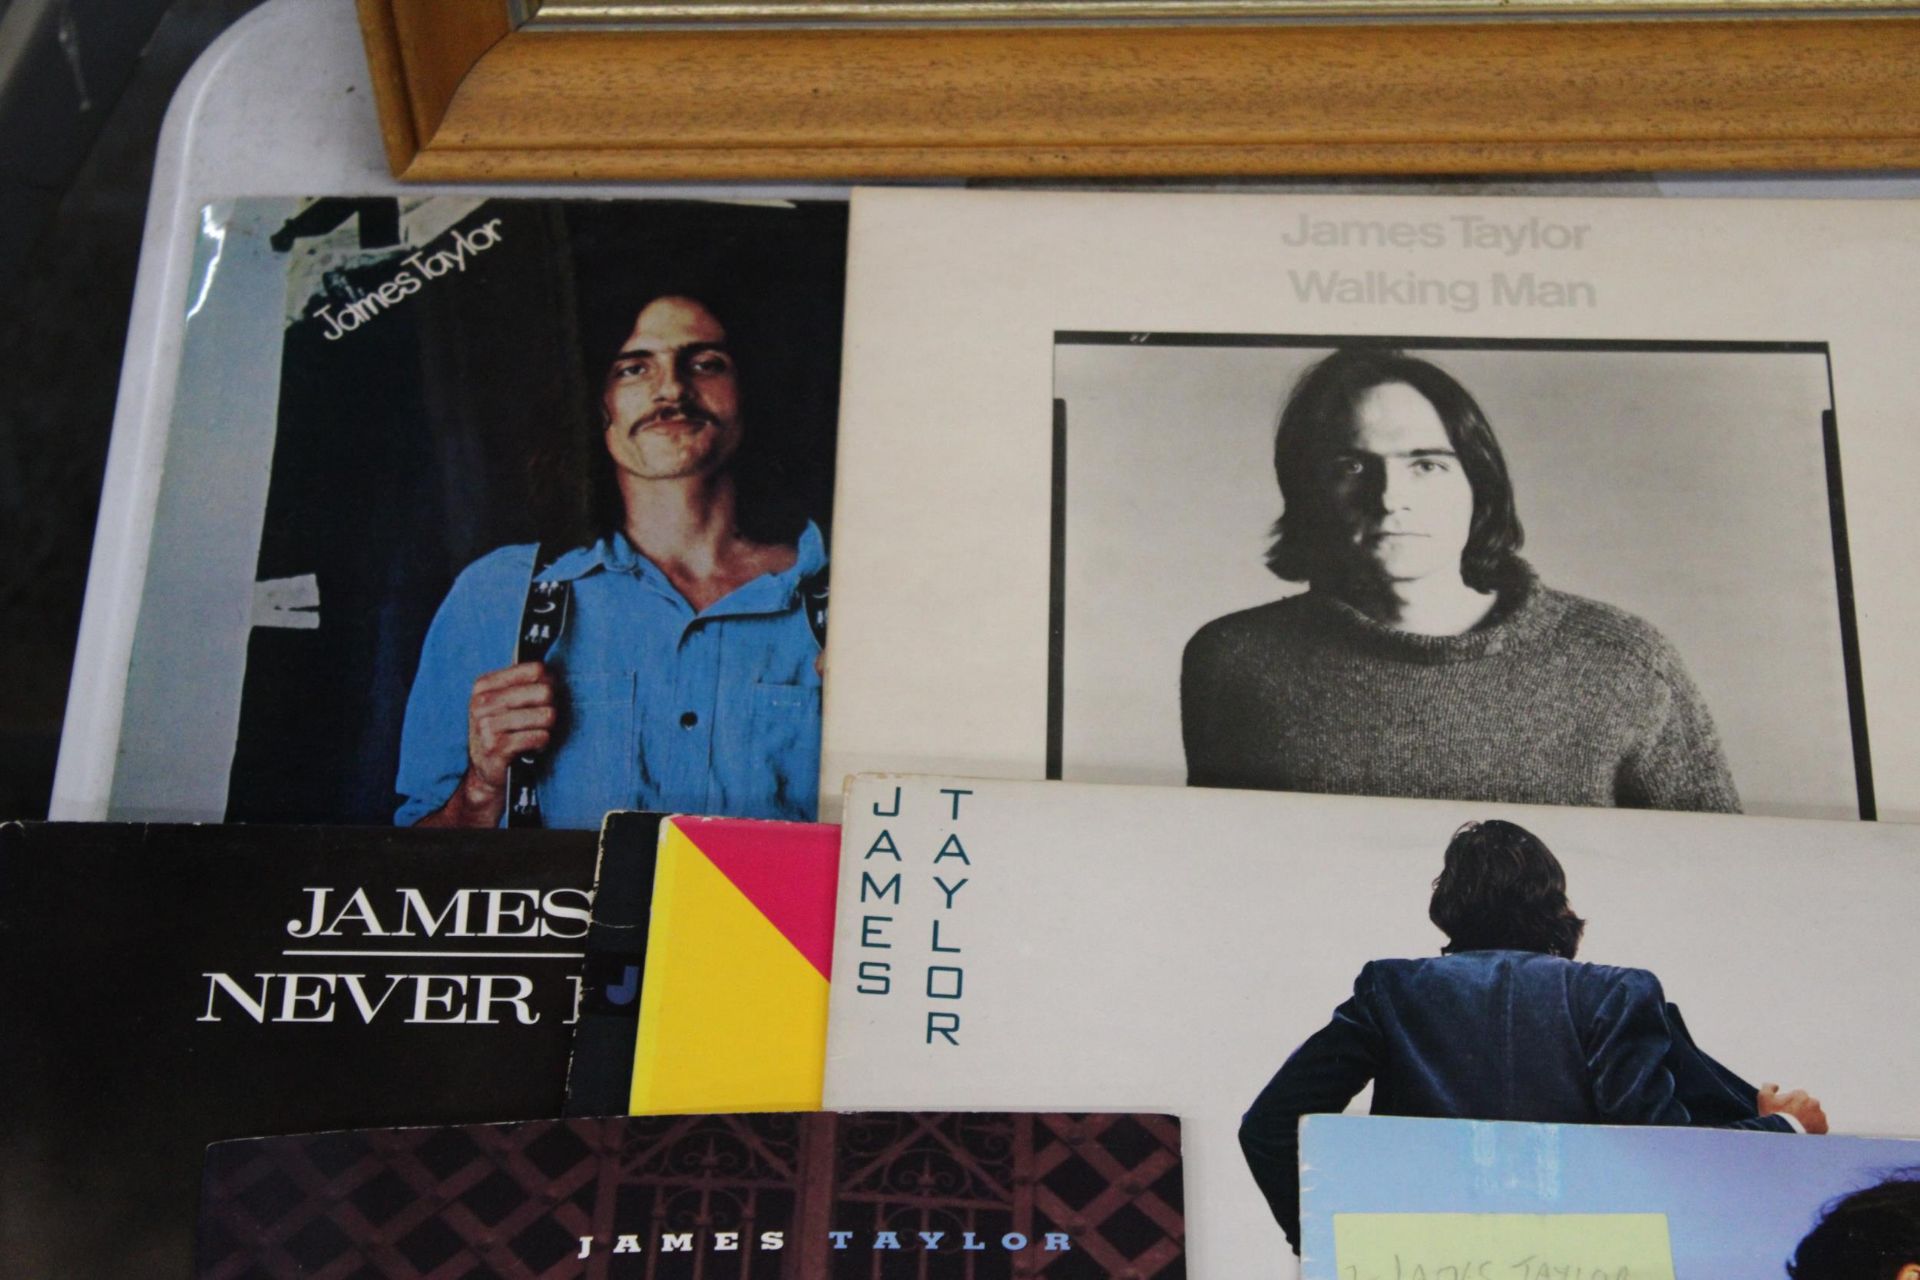 SEVEN JAMES TAYLOR LP RECORD PLUS TWO JAMES TAYLOR PROGRAMMES, ONE SIGNED - Image 3 of 5